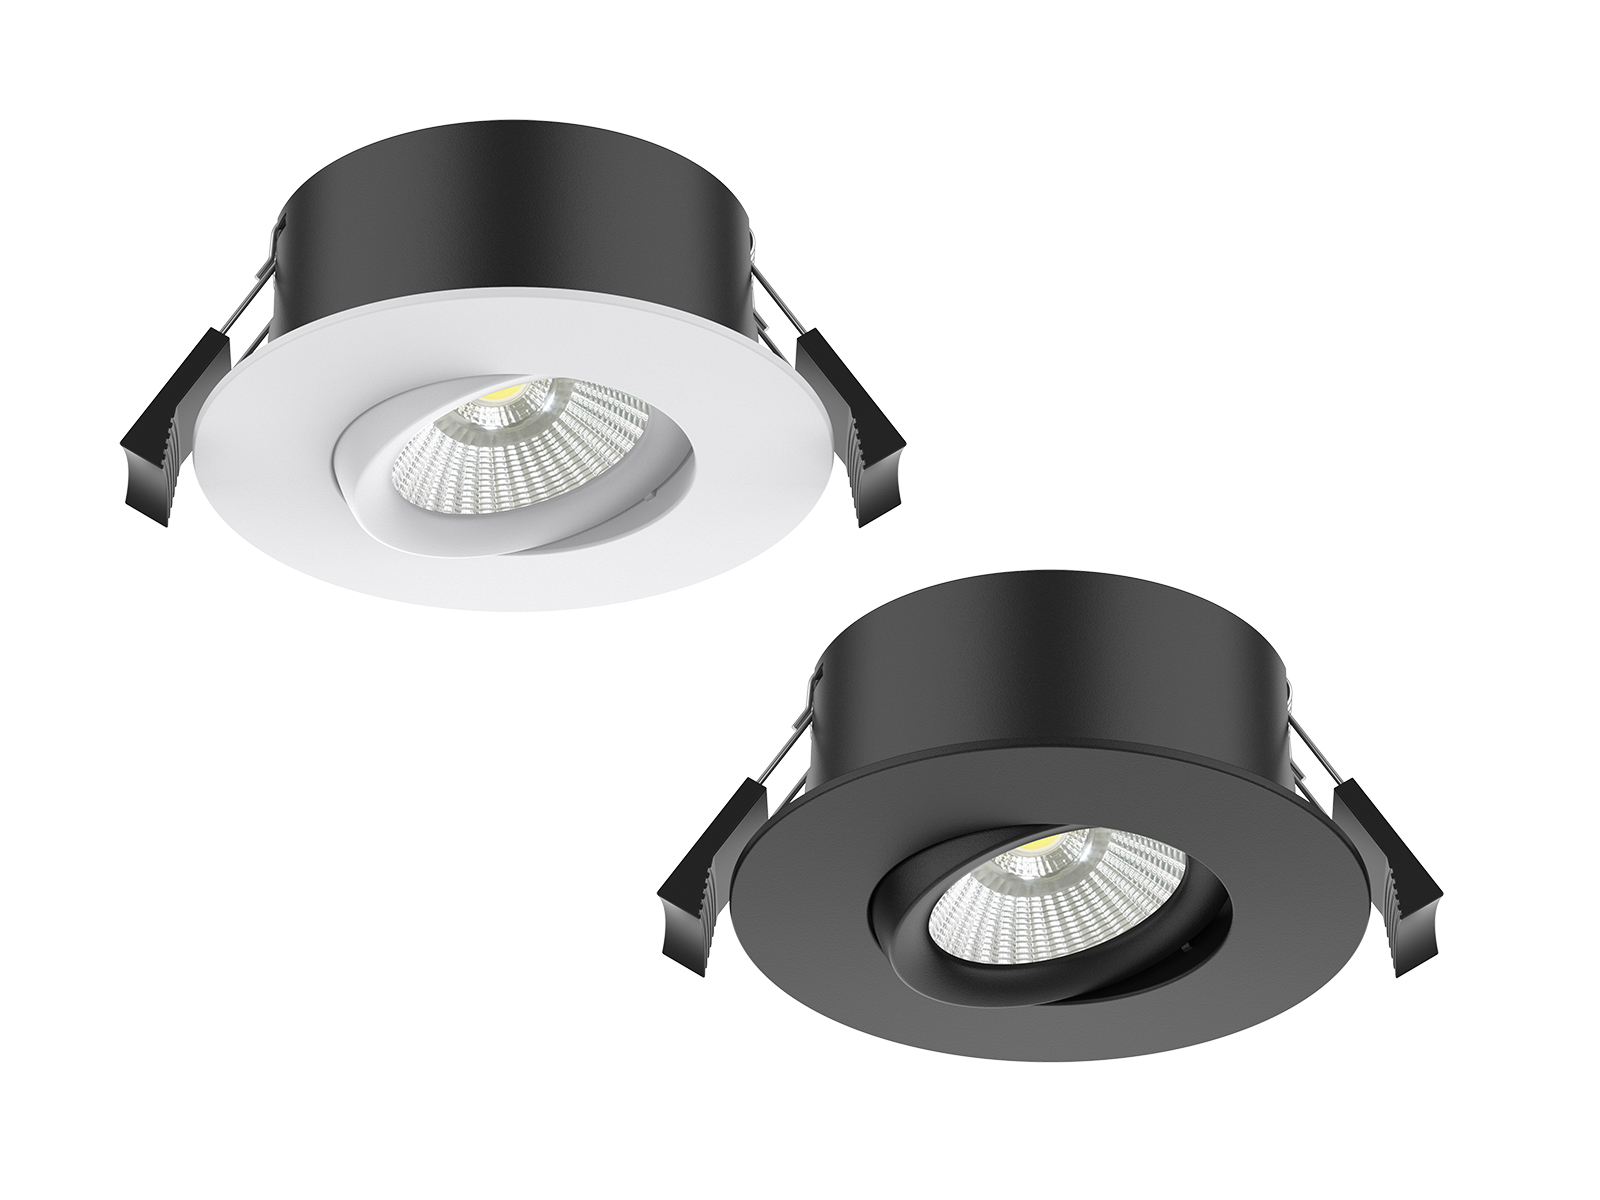 CL168 1 LED downlight